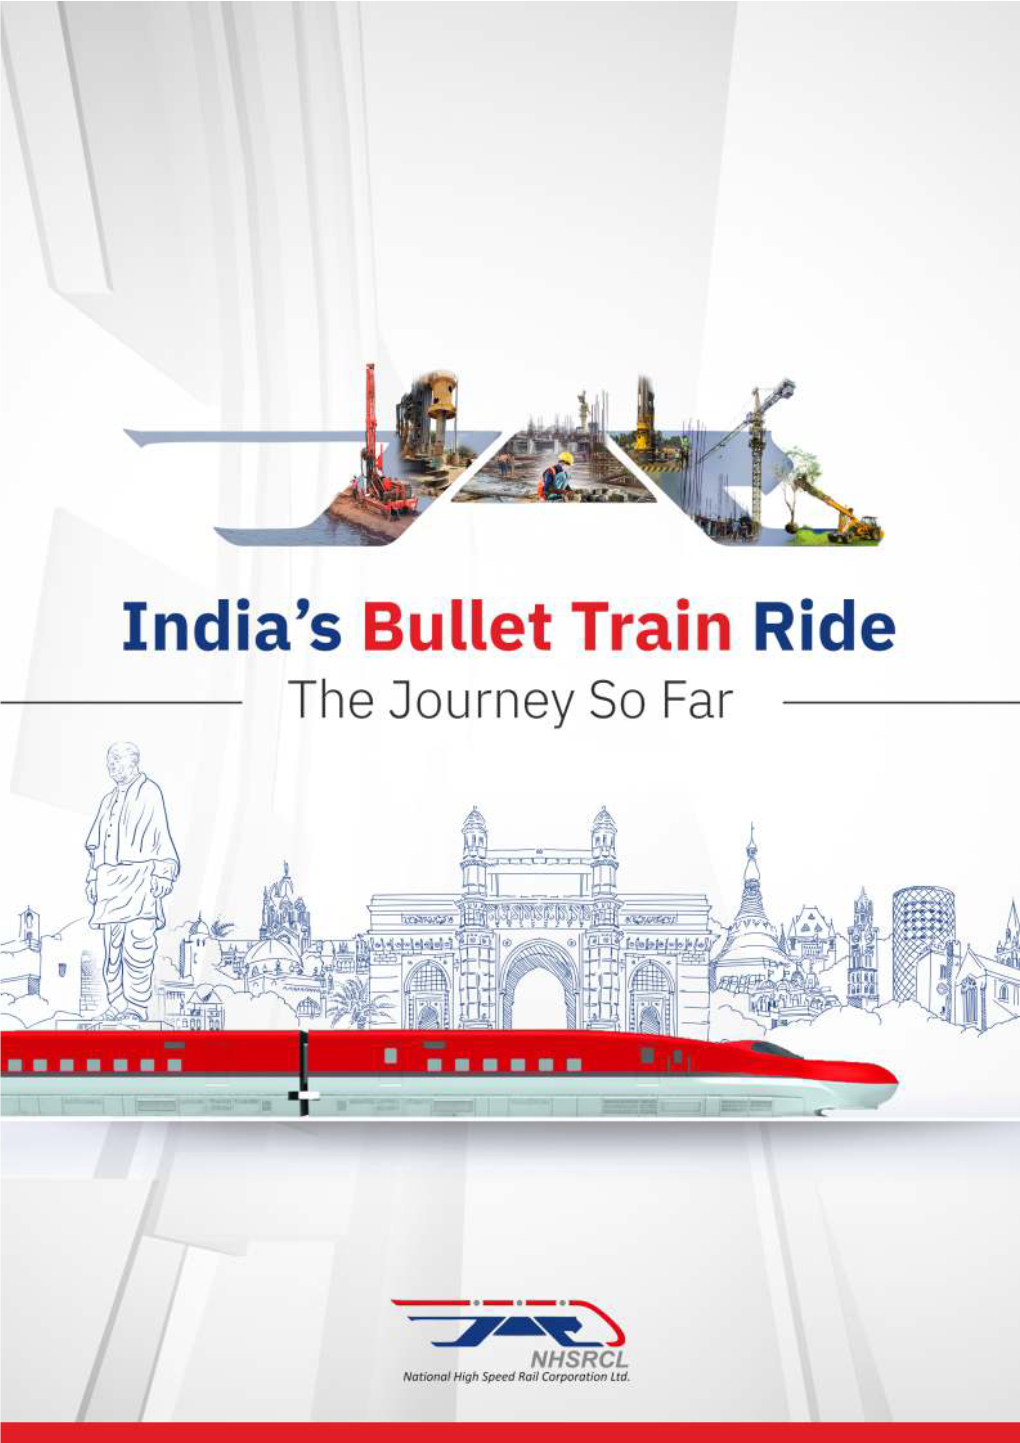 NHSRCL-India's Bullet Train Ride 2.Cdr